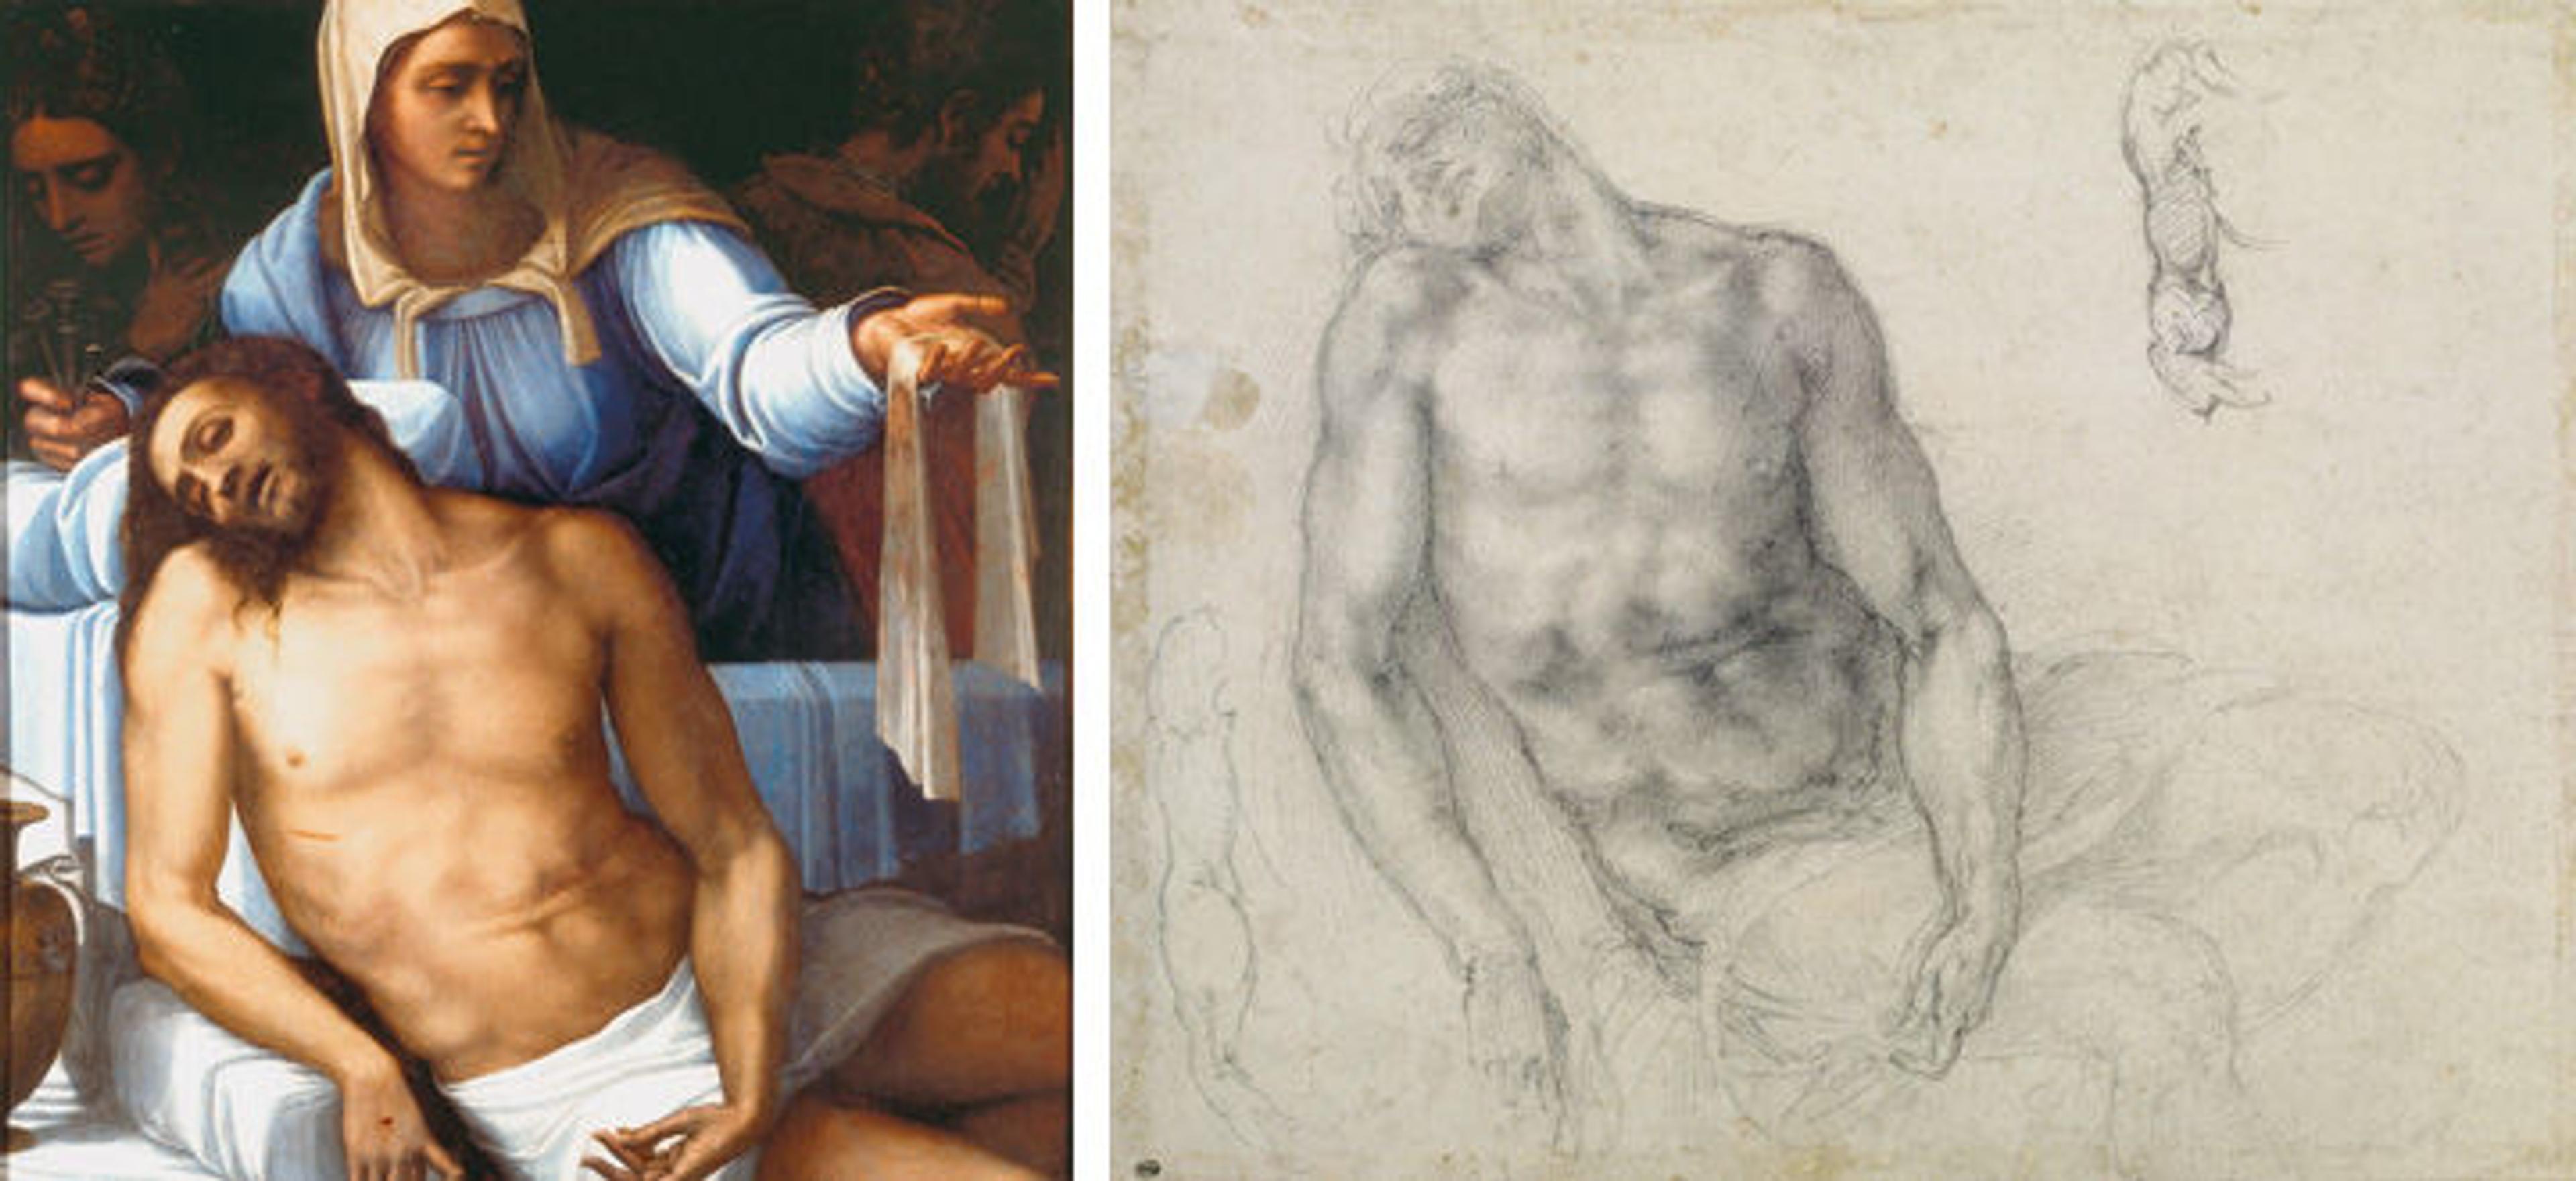 On the left, a painting of Jesus being held by the Virgin Mary by Sebastiano del Piombo. On the right, studies of the Christ as depicted in the Piombo painting